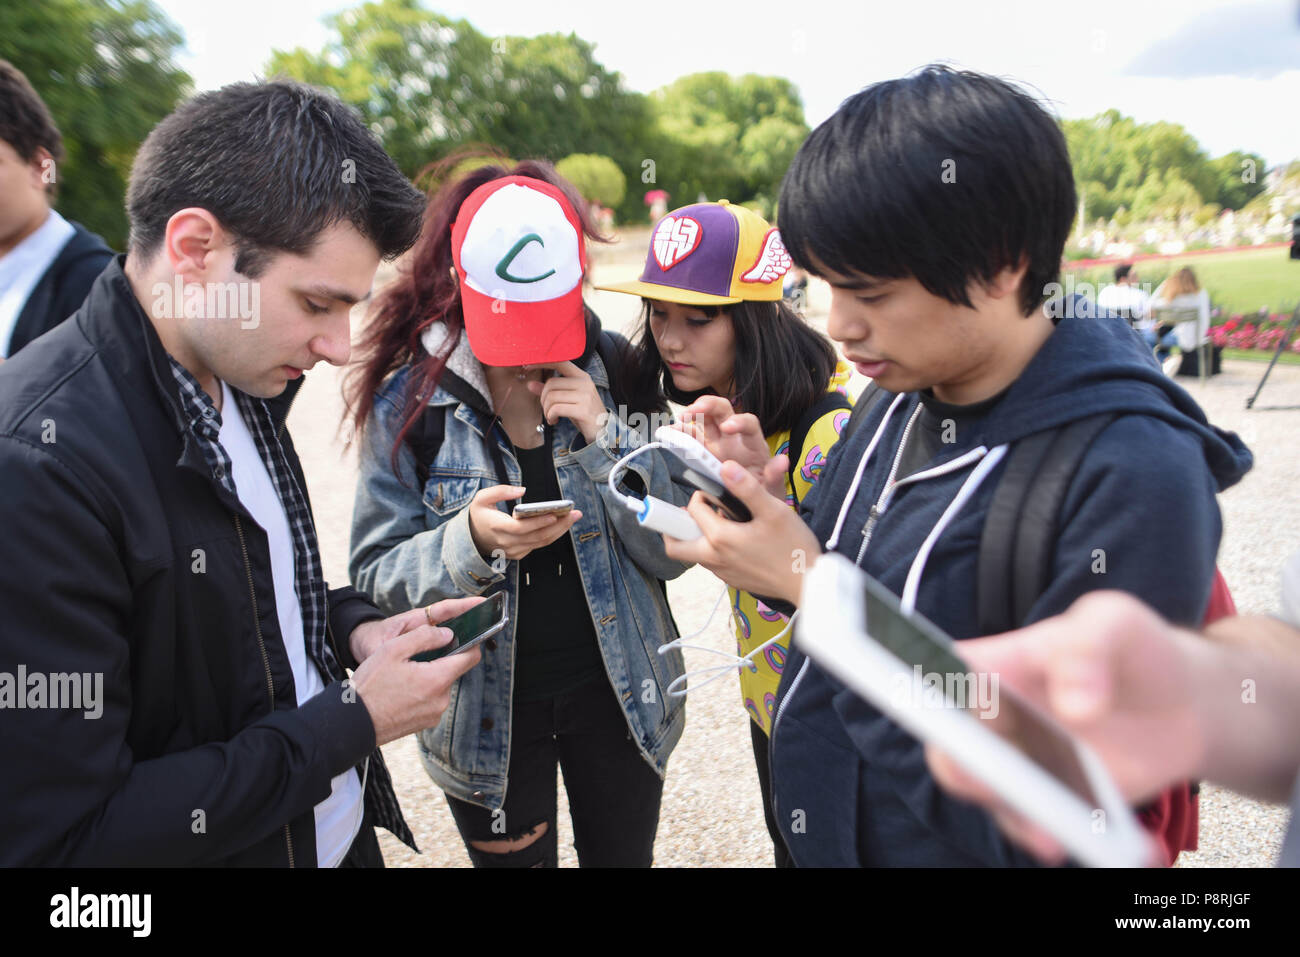 July 14, 2016 - Paris, France: Youths take part in a mass Pokemon hunt in the Luxembourg Garden in central Paris. Hundreds of players of the new Pokemon Go game showed up to take part in a massive hunt despite the authorities' attempt to cancel the event. Despite playing mostly solo, the Pokemon Go users enjoyed to interact and meet other players. Millions of users have already downloaded the game, which requires users to catch on-screen pokemon characters using their real-world location.  Des jeunes participent a une chasse au Pokemons dans le jardin du Luxembourg avec l'application Pokemon G Stock Photo